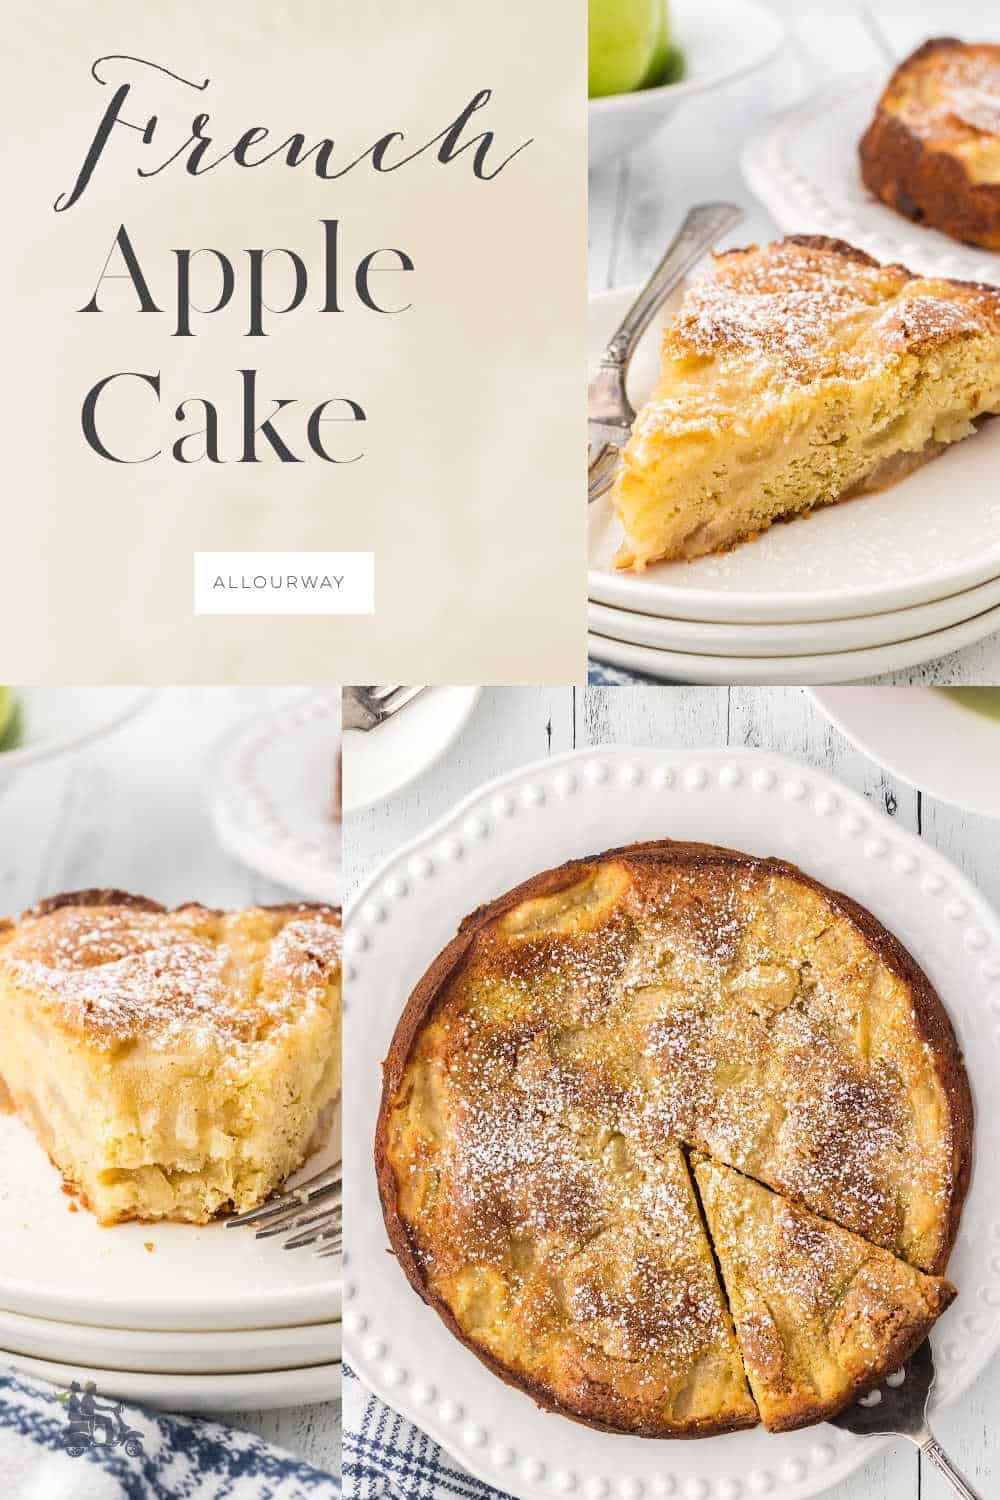 Prepare to fall head over heels for Dorie Greenspan's French Apple Cake-inspired recipe. This magically mouthwatering creation combines the perfect balance of tender apples, warm spices, and a luscious buttery crust—it's simply irresistible!